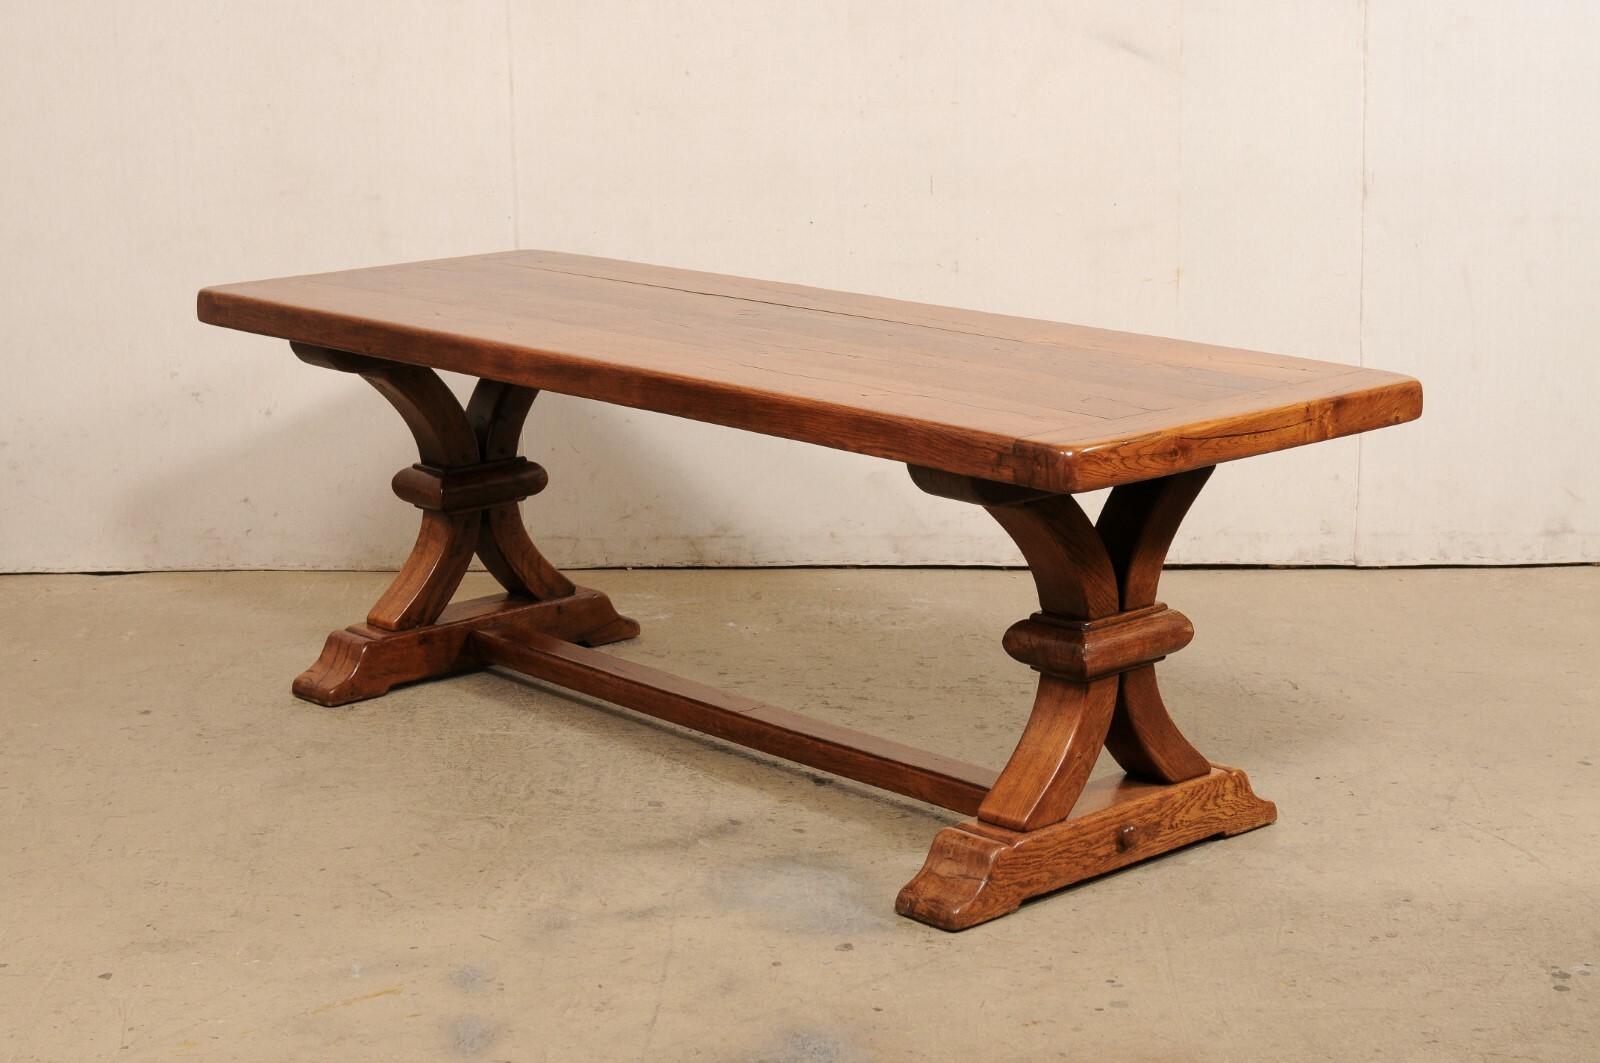 Antique French Wooden Dining Table w/Nicely Carved Trestle Legs, 7+ Ft Long For Sale 1